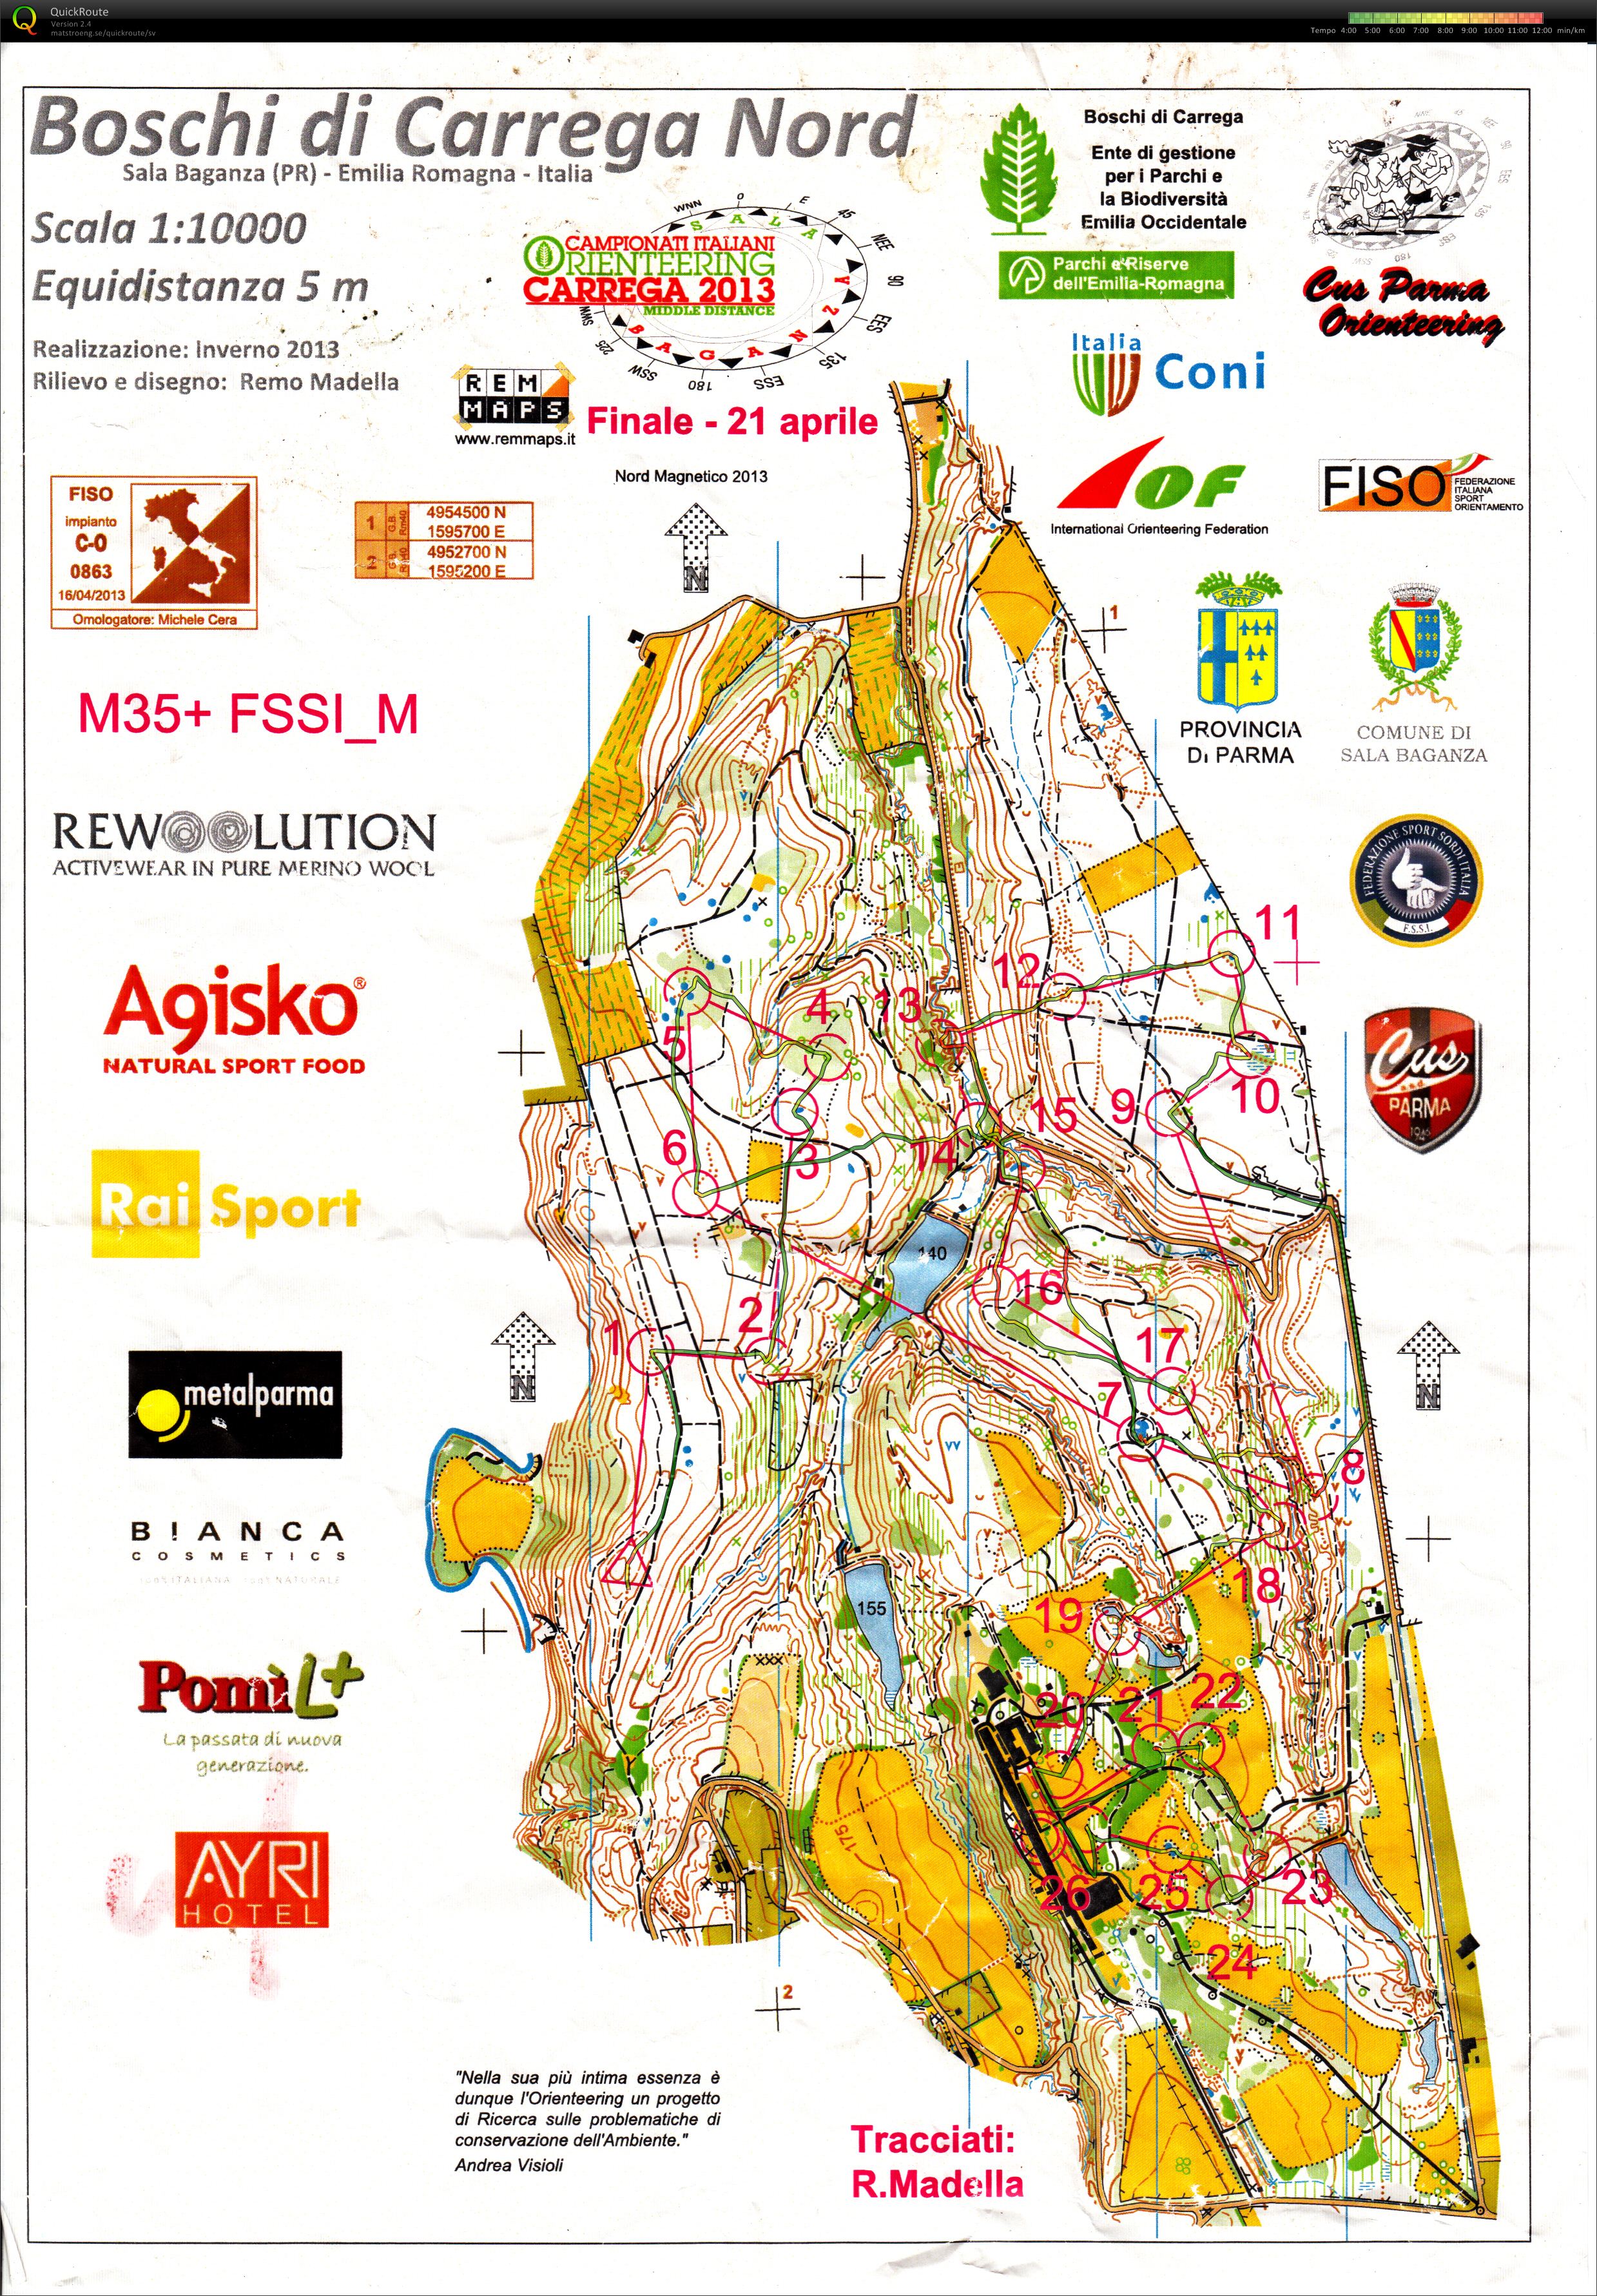 Italian Championship Middle Distance Final (21-04-2013)